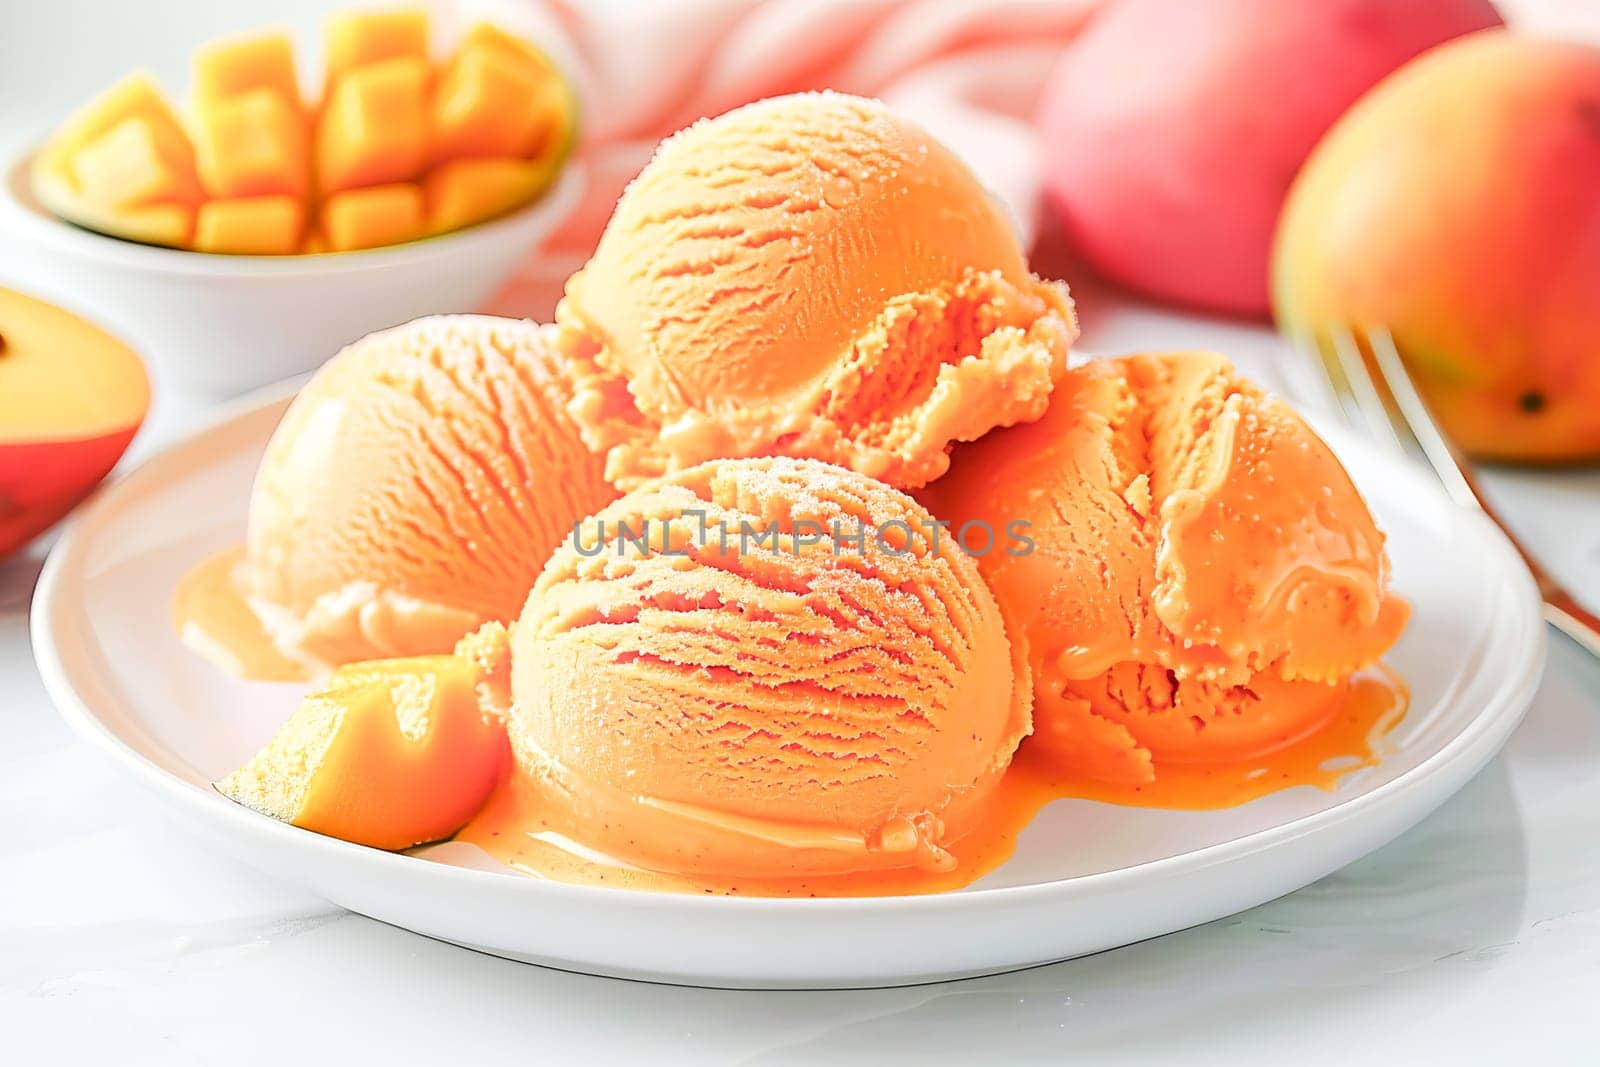 Balls of delicious mango ice cream lie in a white bowl on a table with a marble surface.